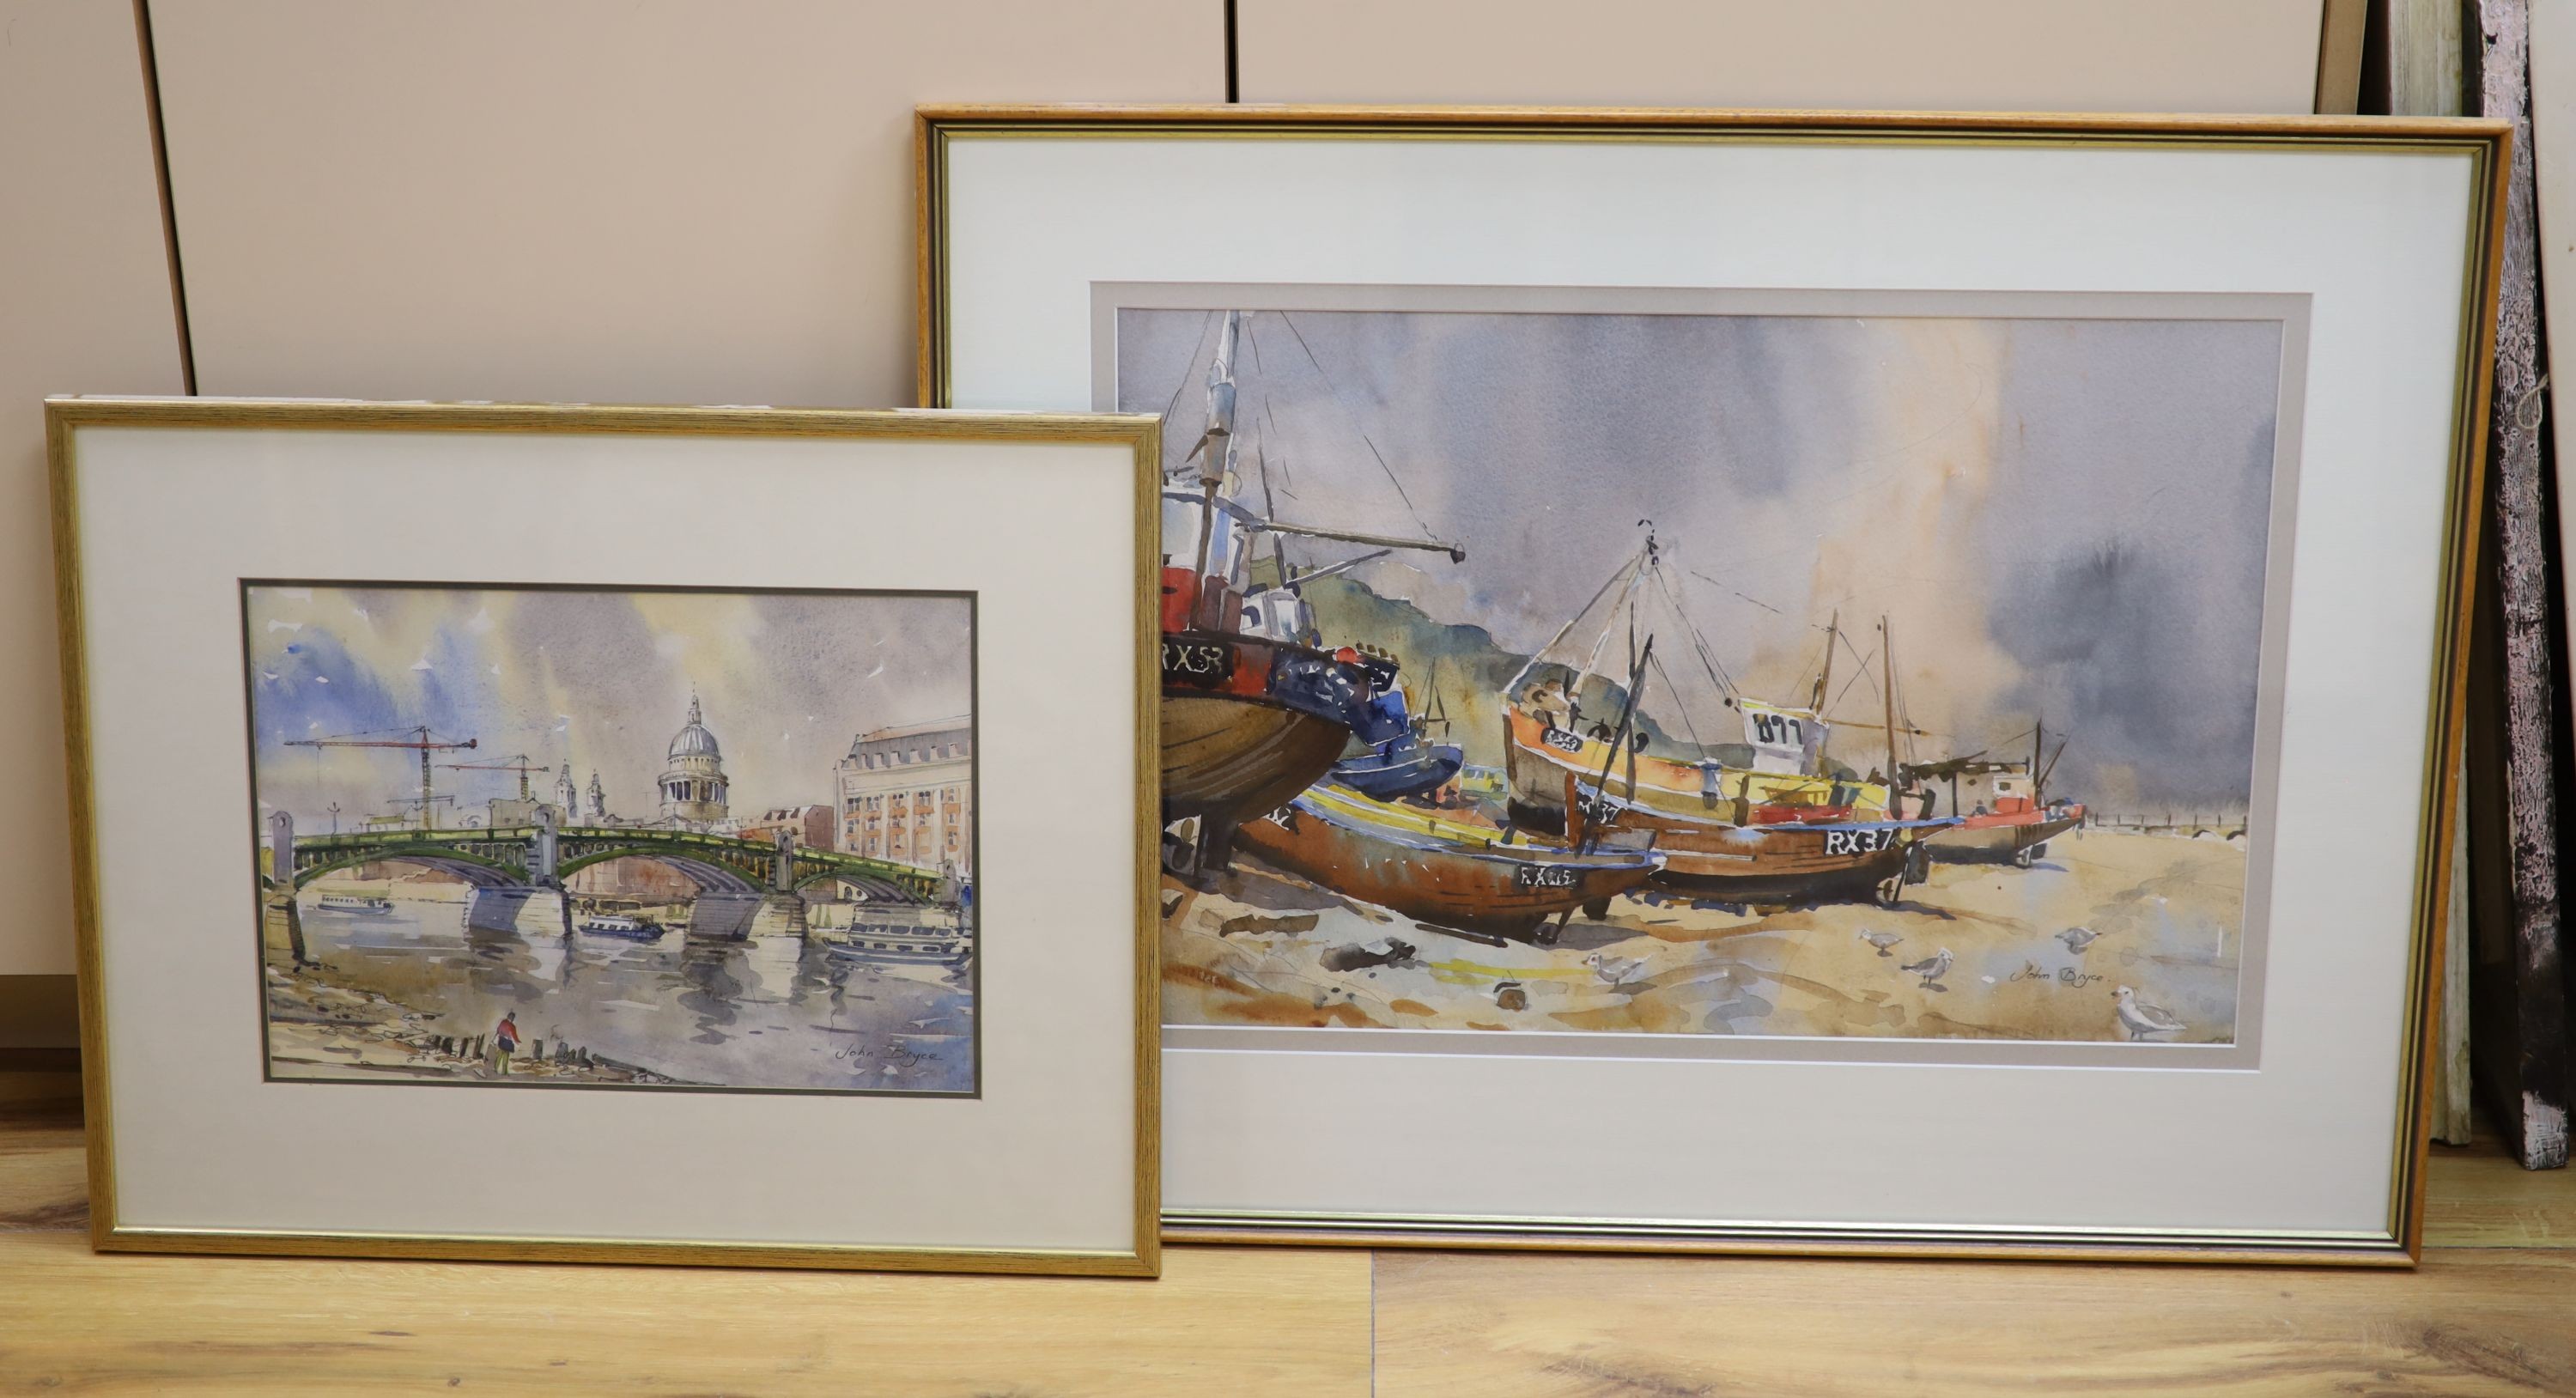 John Bryce (b. 1934), two watercolours, Southwark Bridge and St Paul's and Fishing boats, signed, 24 x 34cm and 35 x 54cm